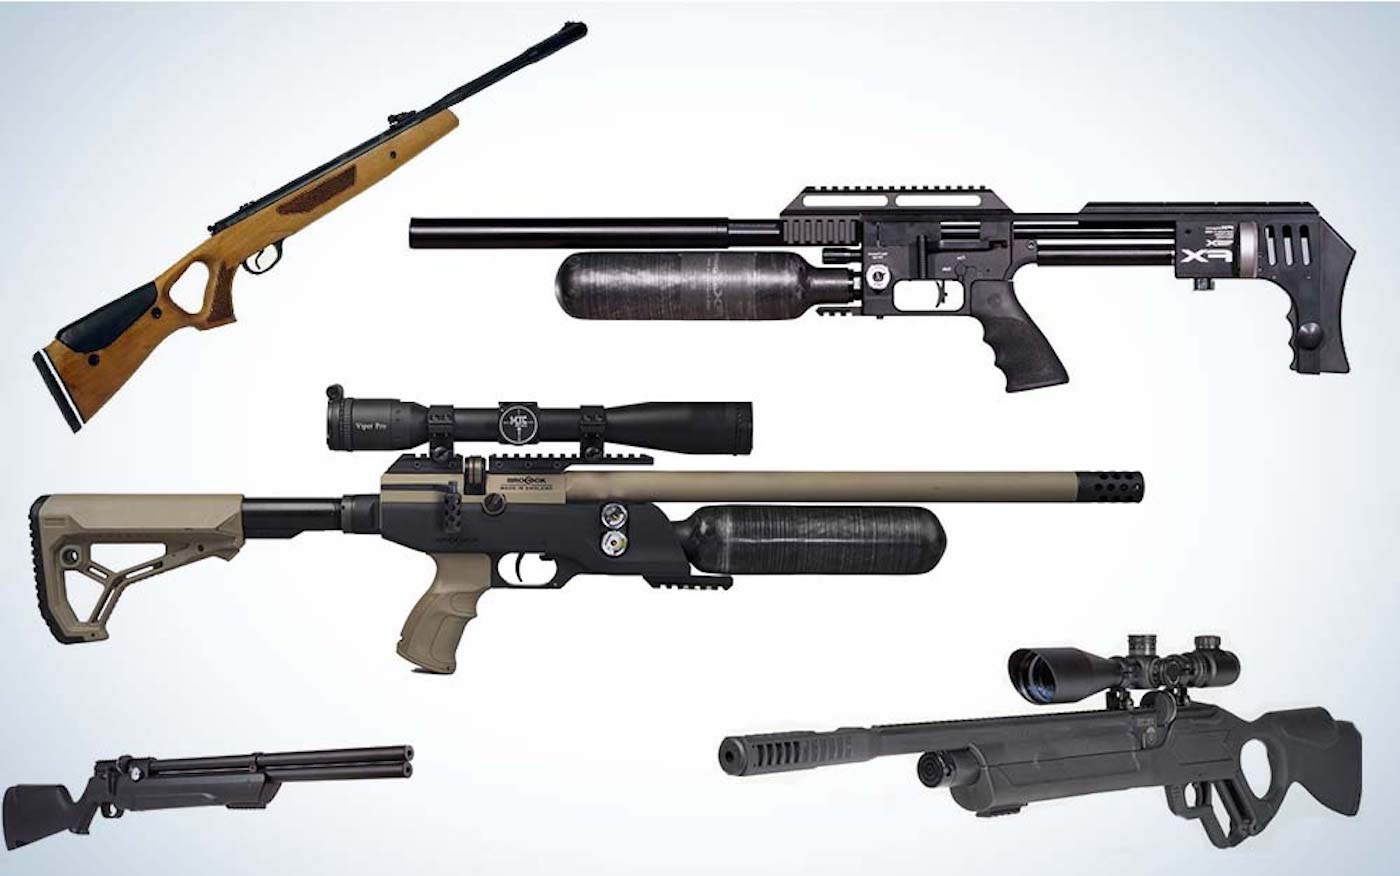 The Best .22 Air Rifles for Hunting, Competition, and Backyard Shooting, Tested and Reviewed